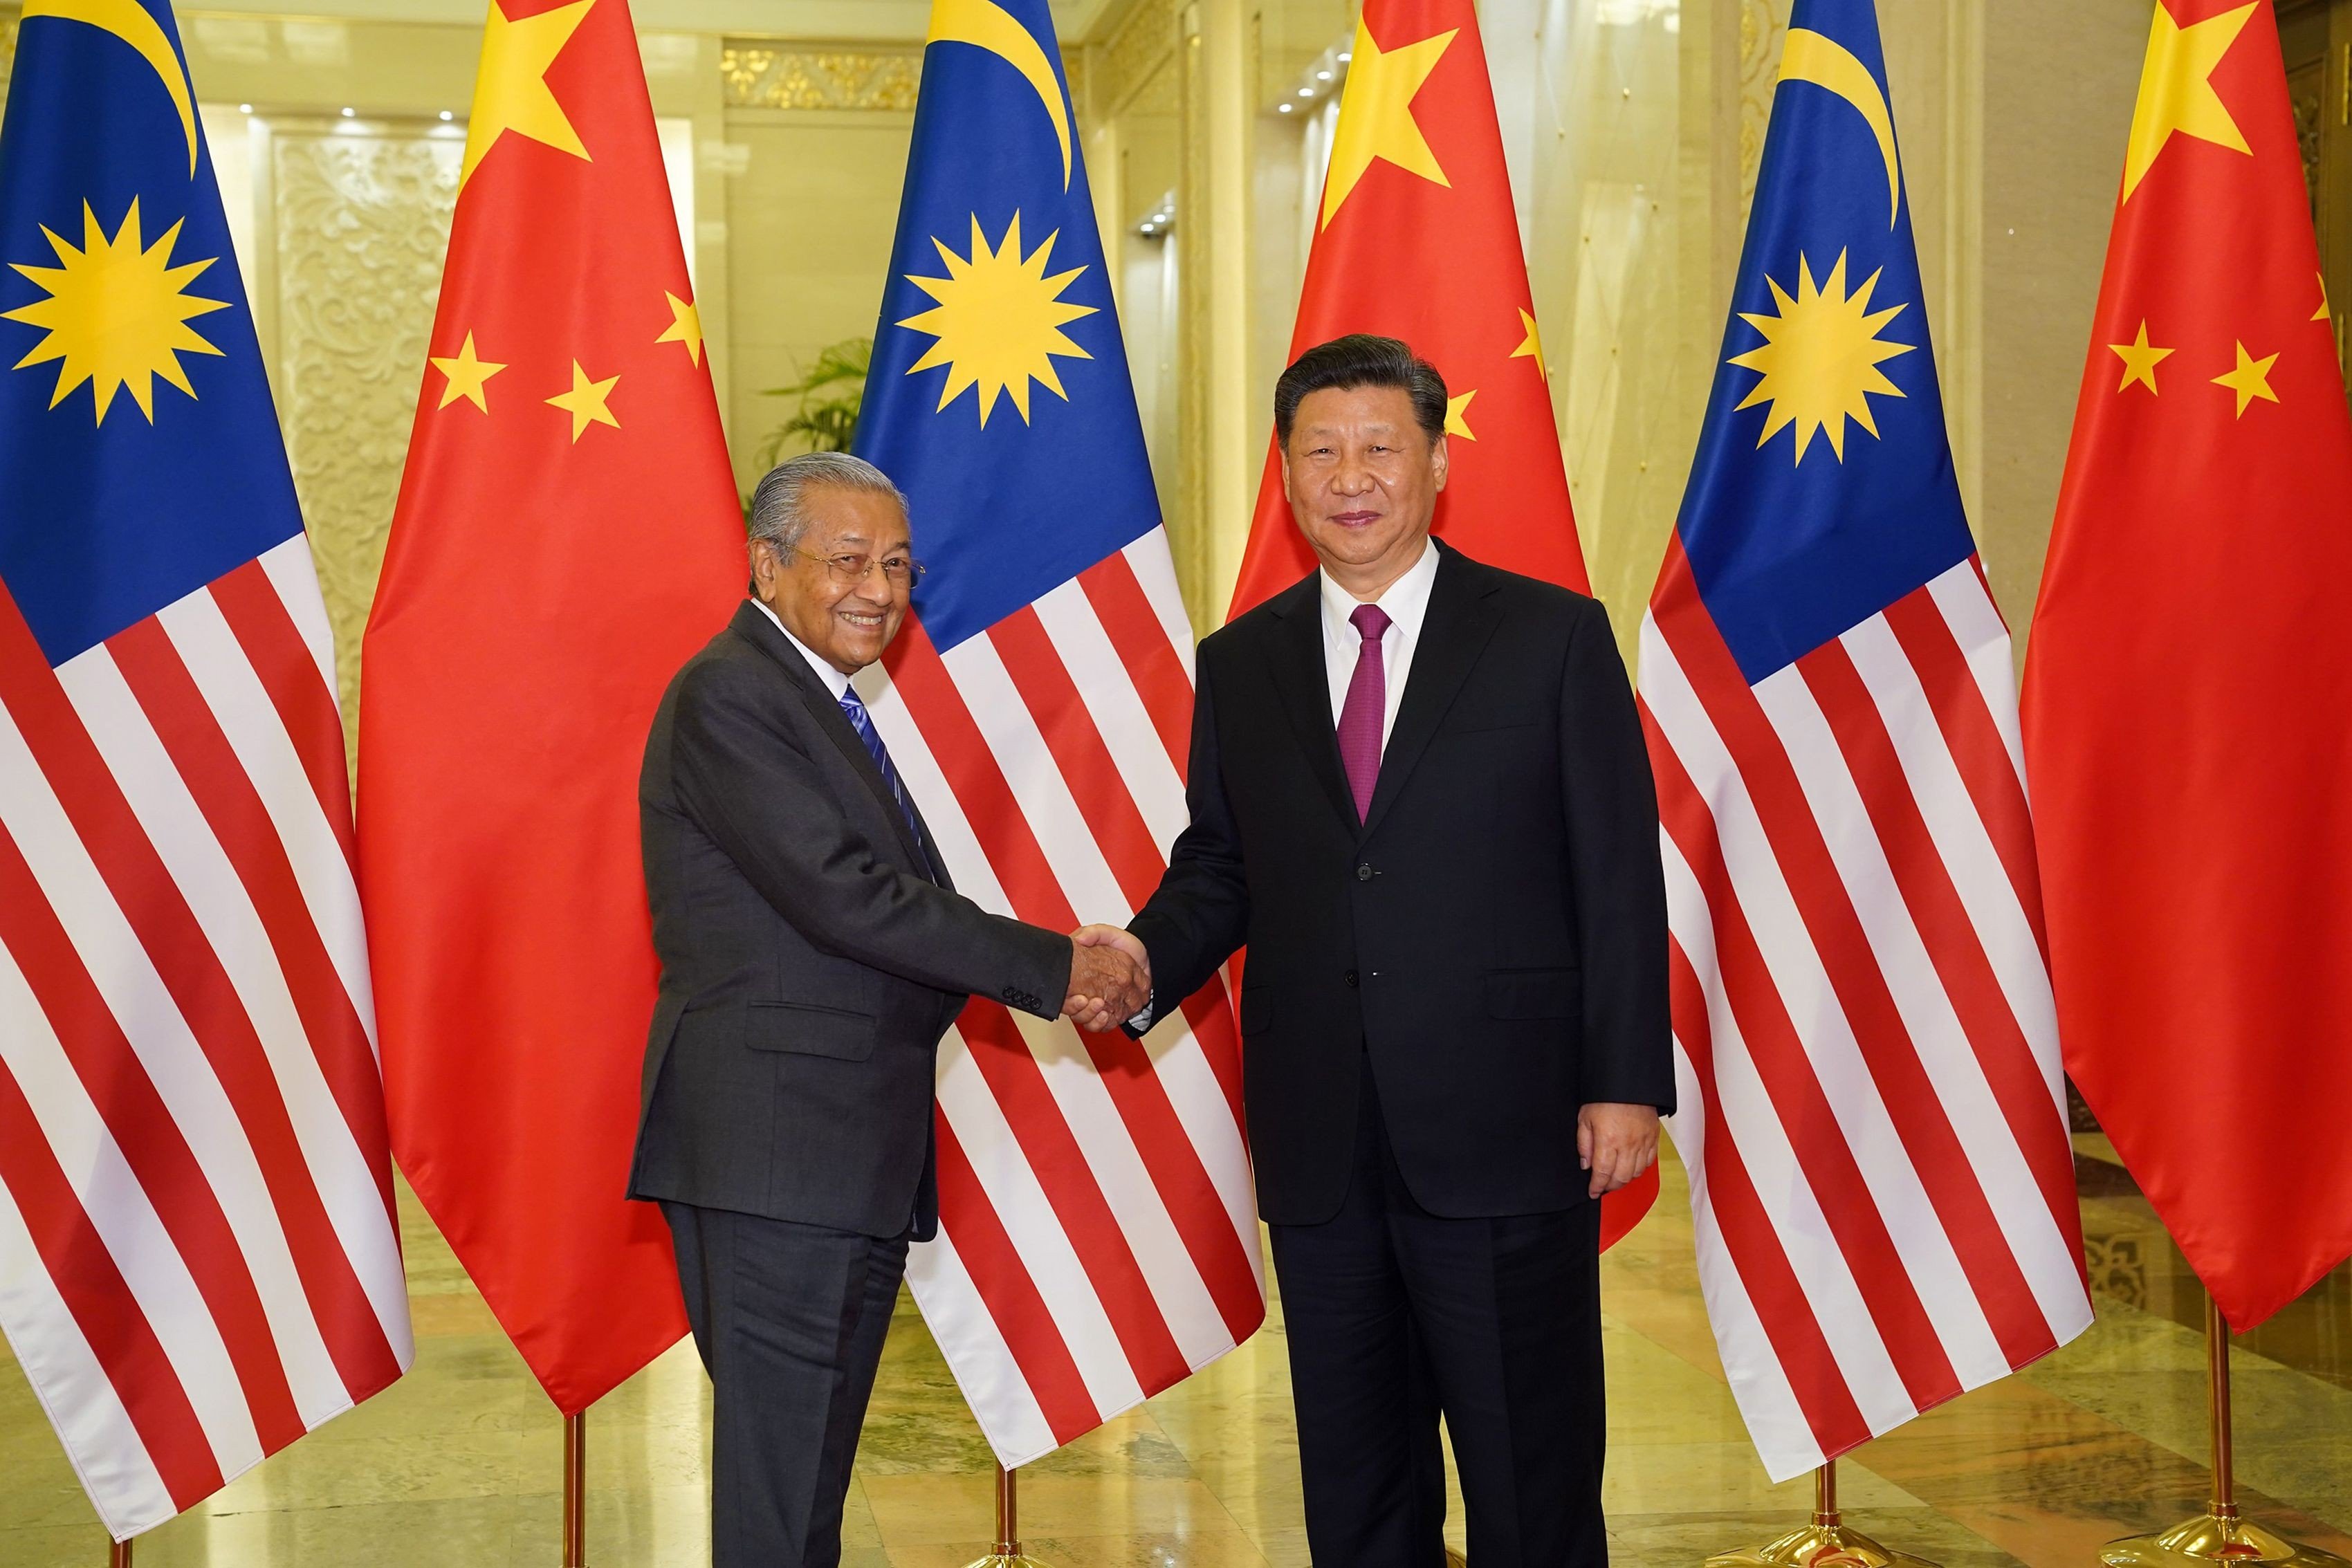 Malaysian PM Mahathir Mohamad with Chinese President Xi Jinping. Photo: AFP